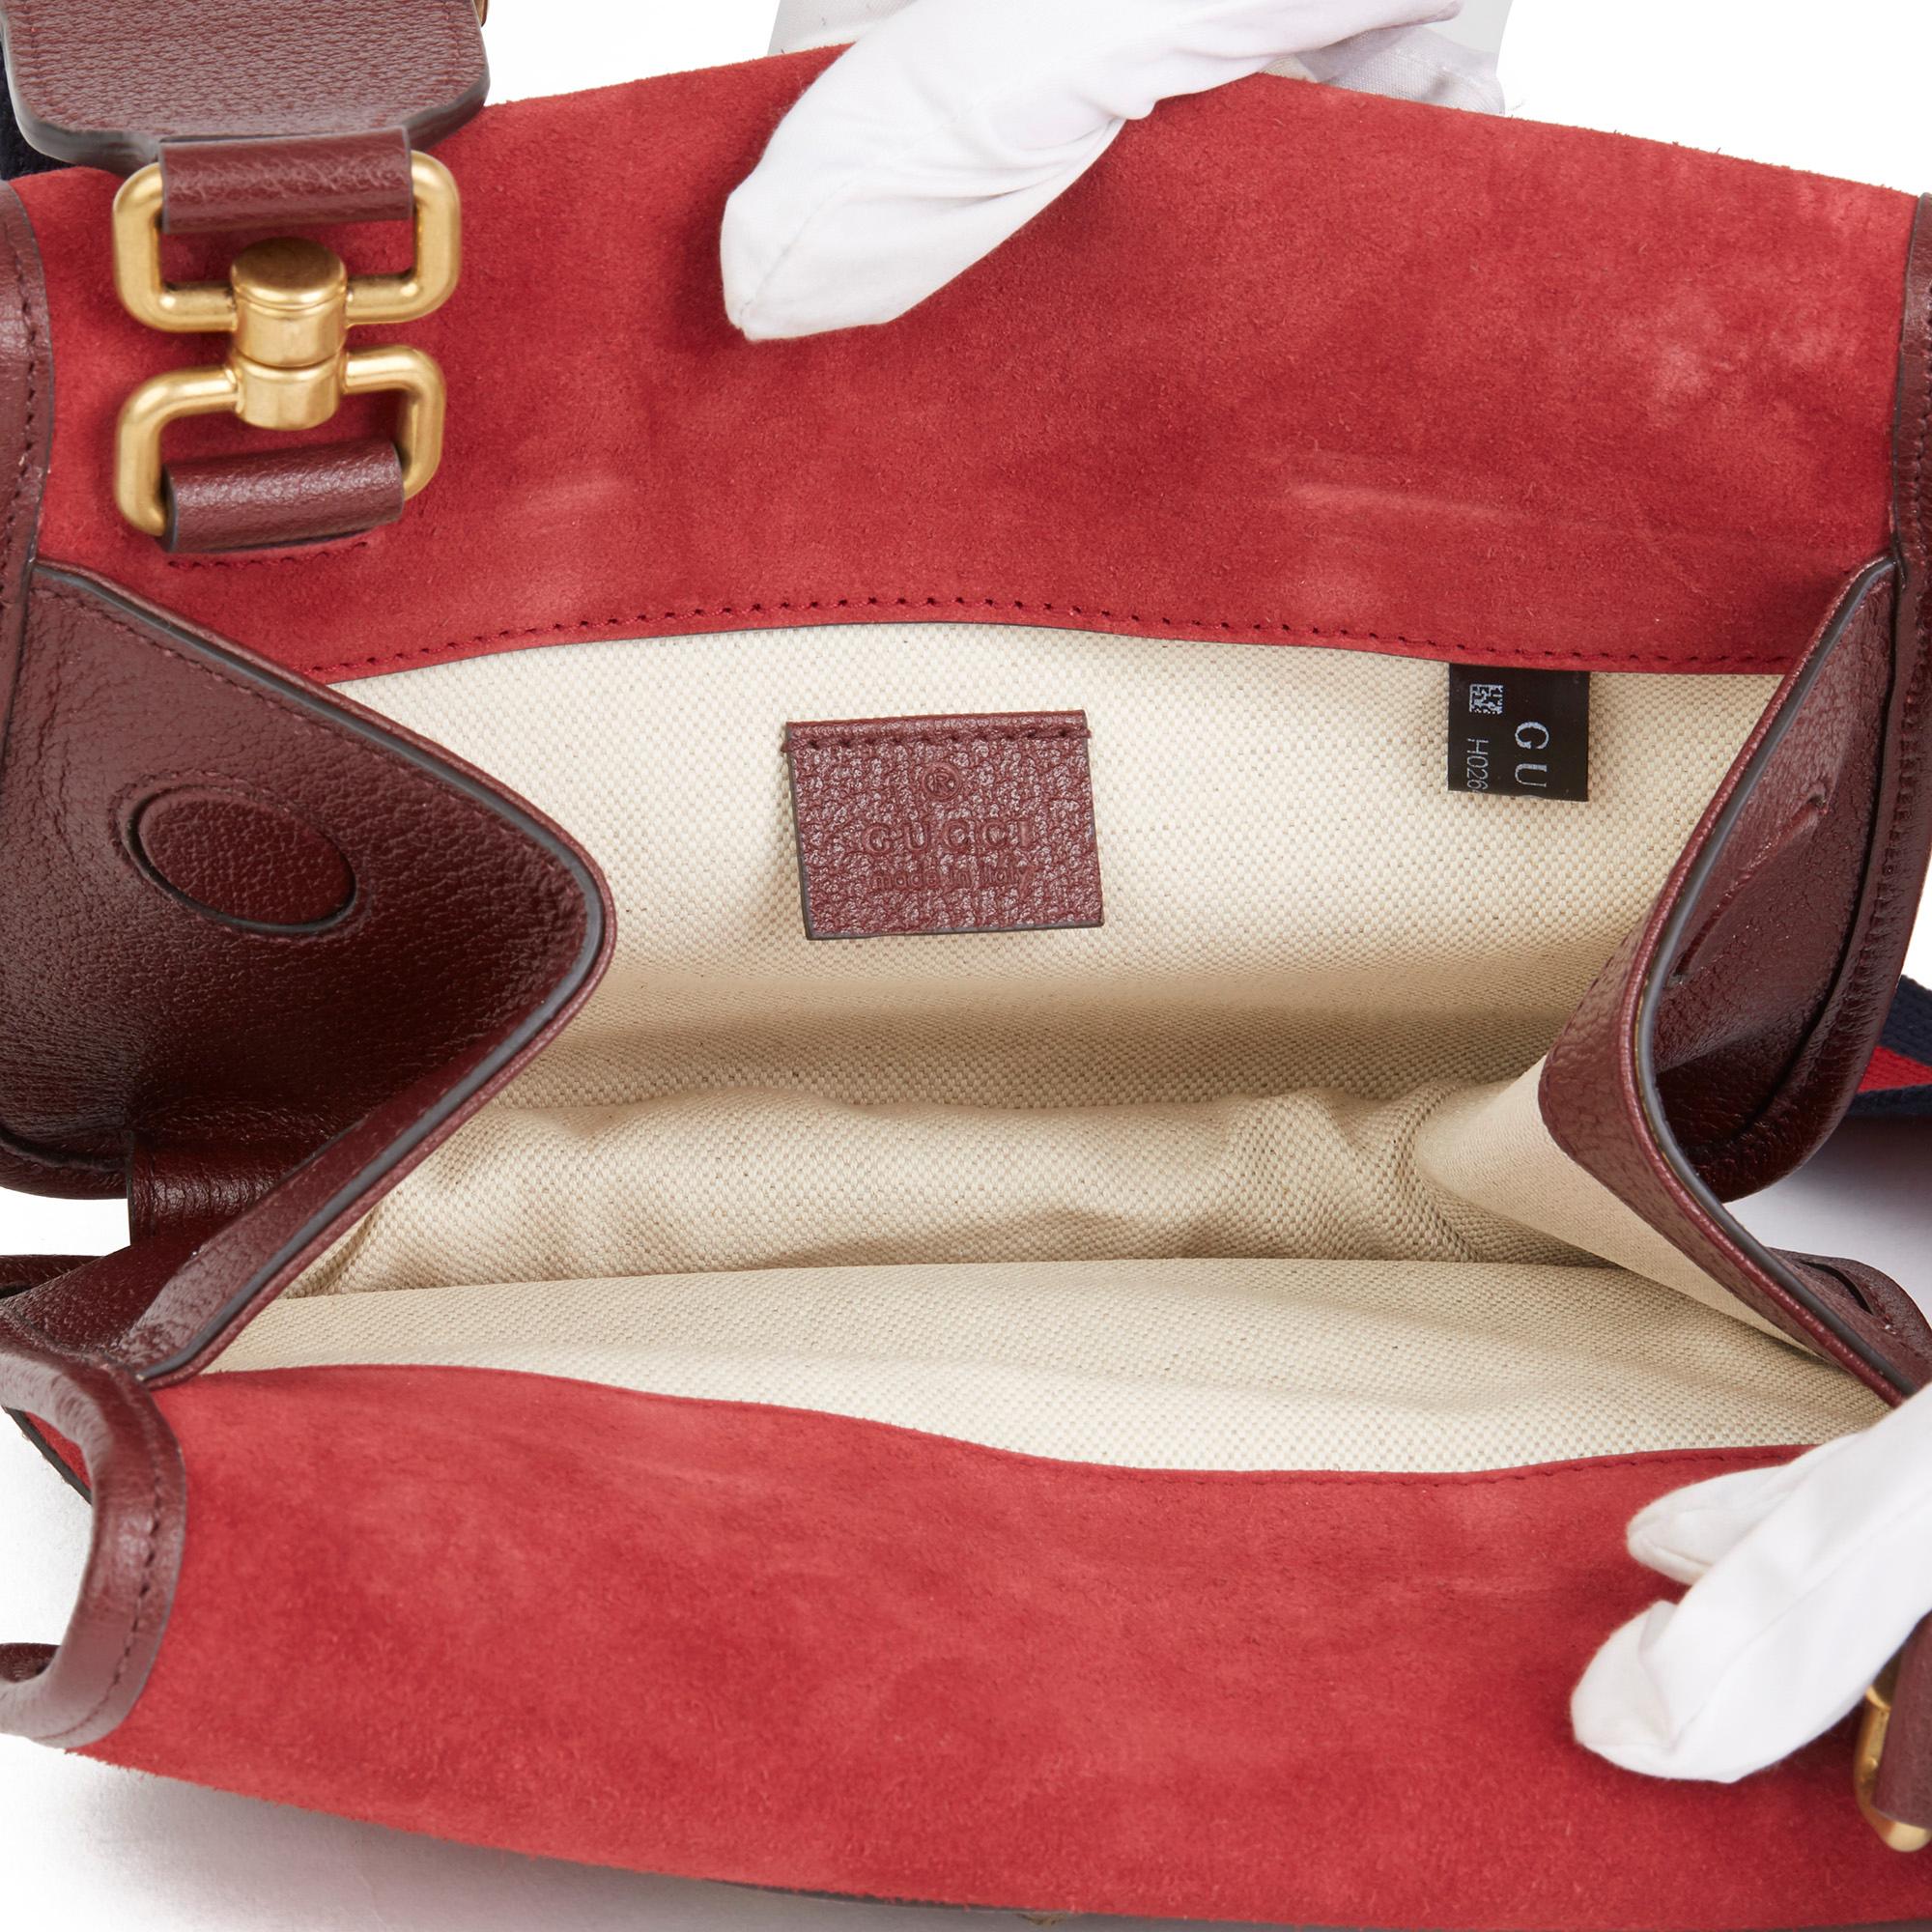 2020 Gucci Red Suede & Burgundy Pigskin, Navy Web Small Messenger Bag 6